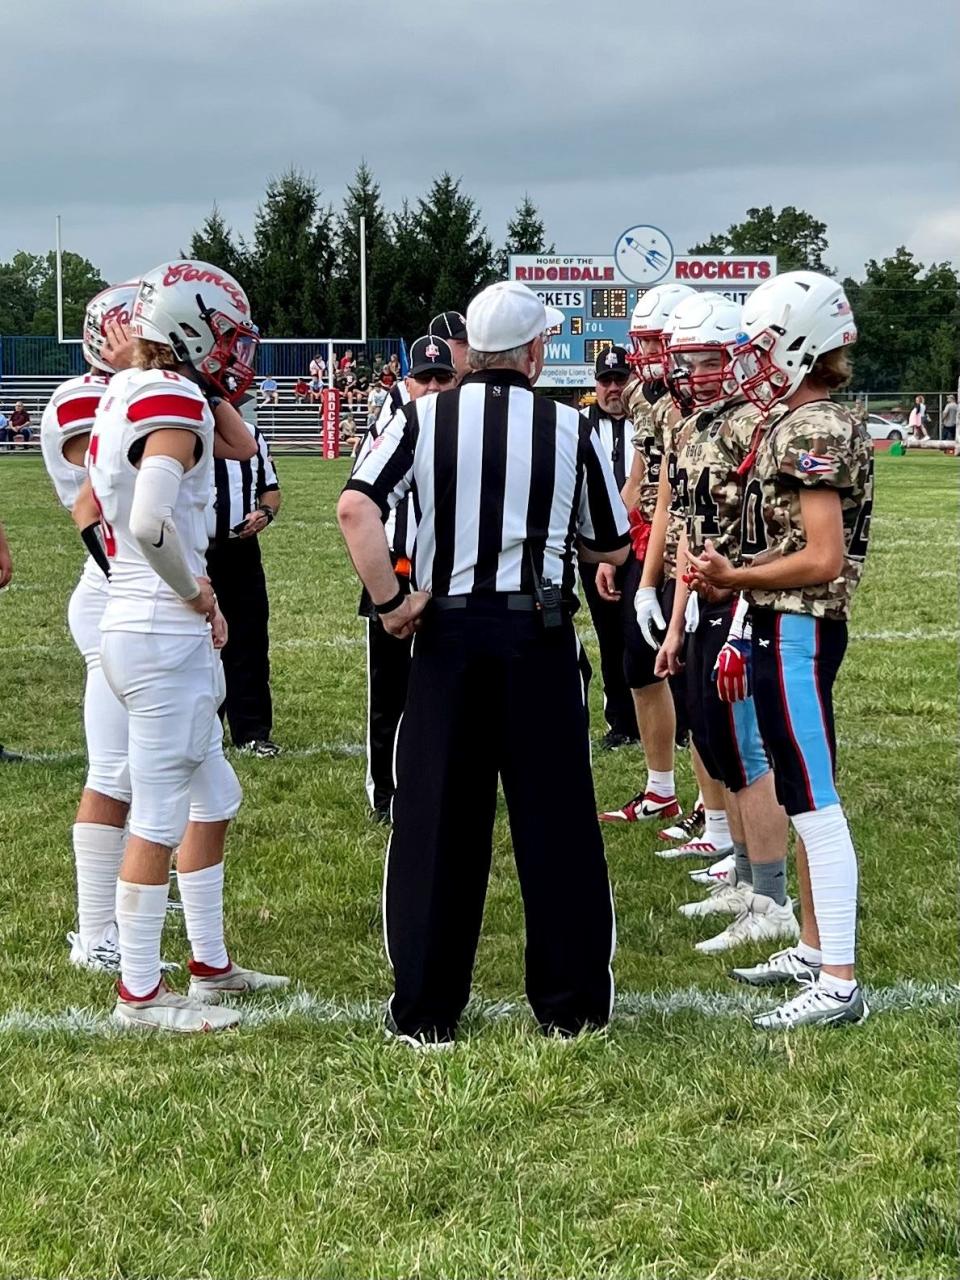 The Elgin and Ridgedale captains meet for the coin toss before their Week 2 football game at Ridgedale.